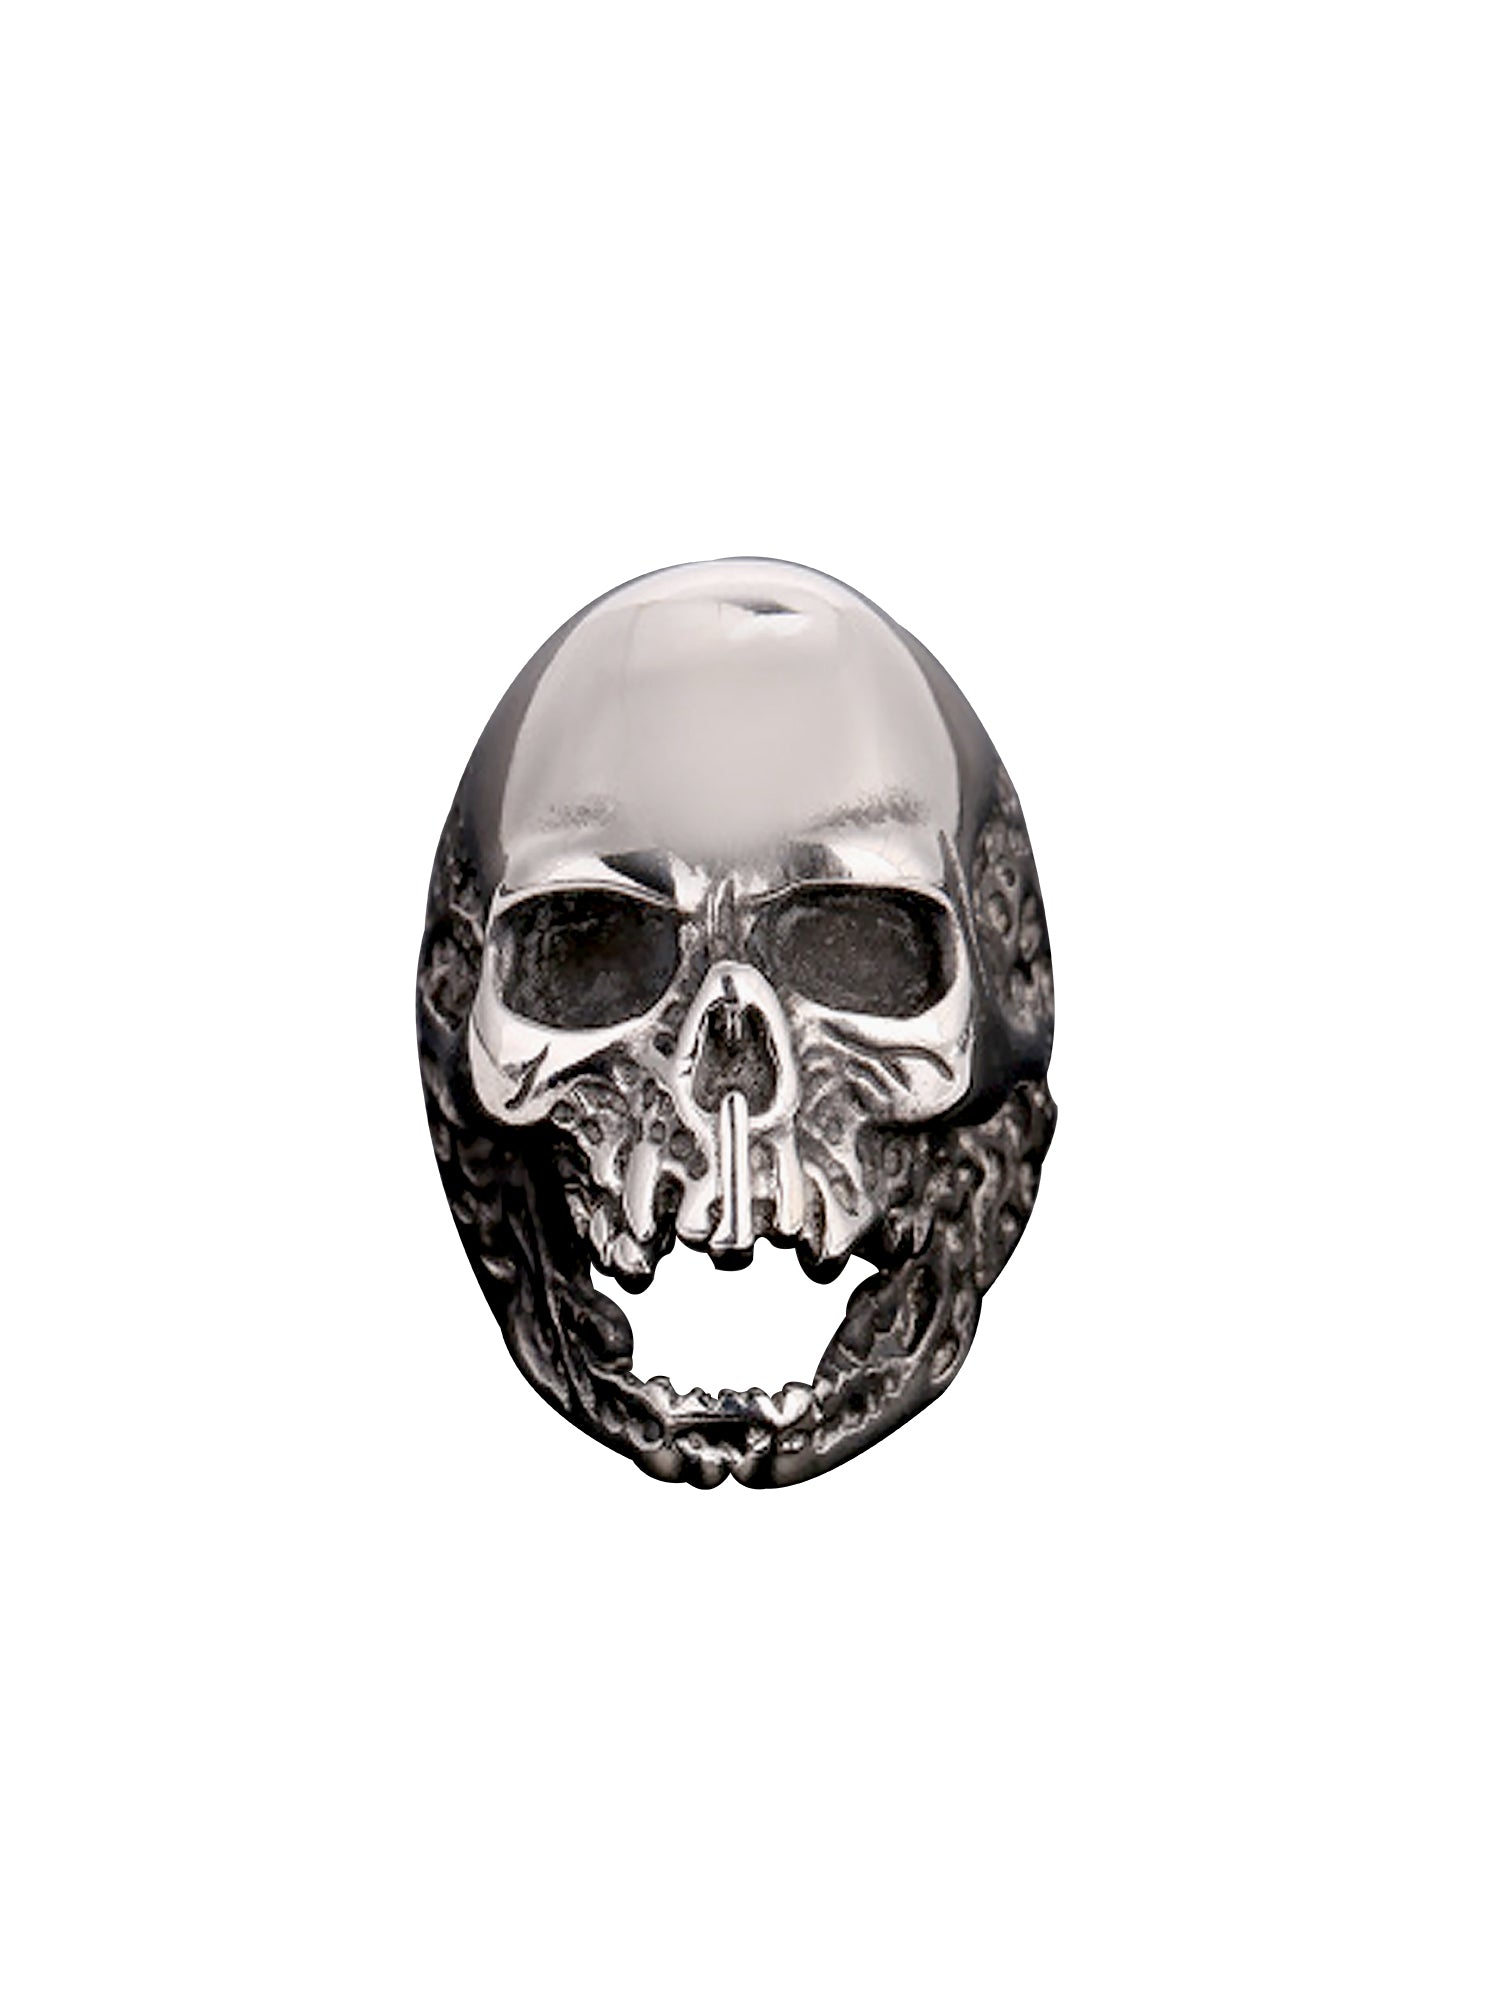 Gaping Eyes and Worm Holes Skull Ring Stainless Steel - US Size 13